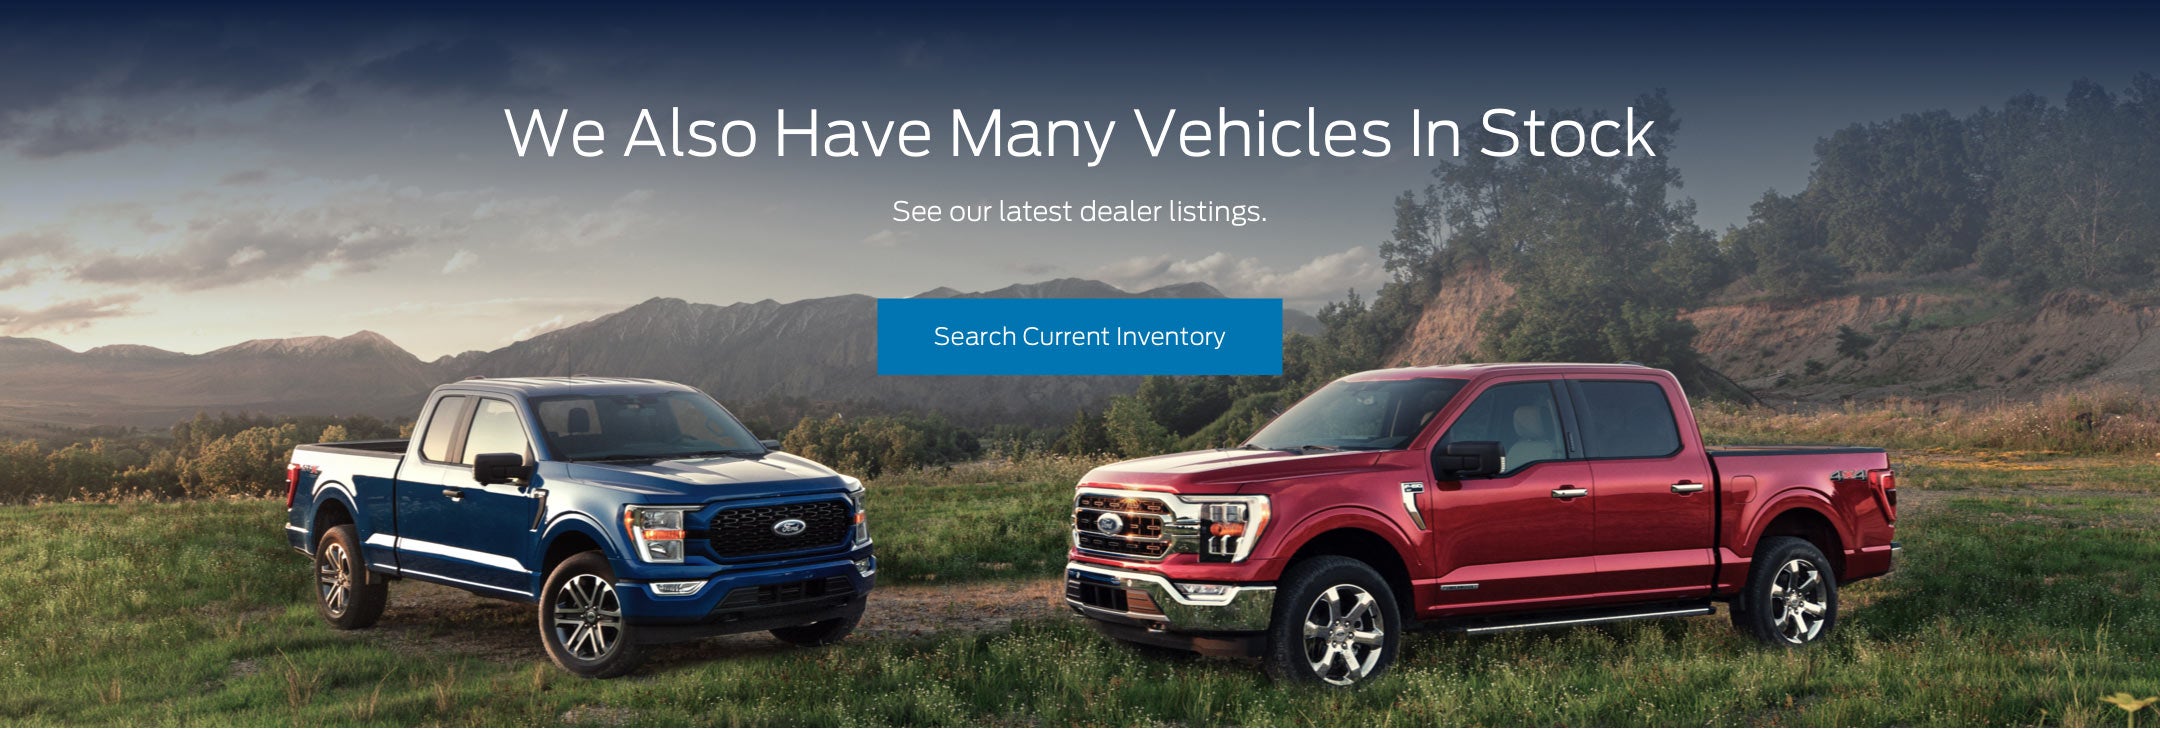 Ford vehicles in stock | LaFontaine Ford Lansing in Lansing MI